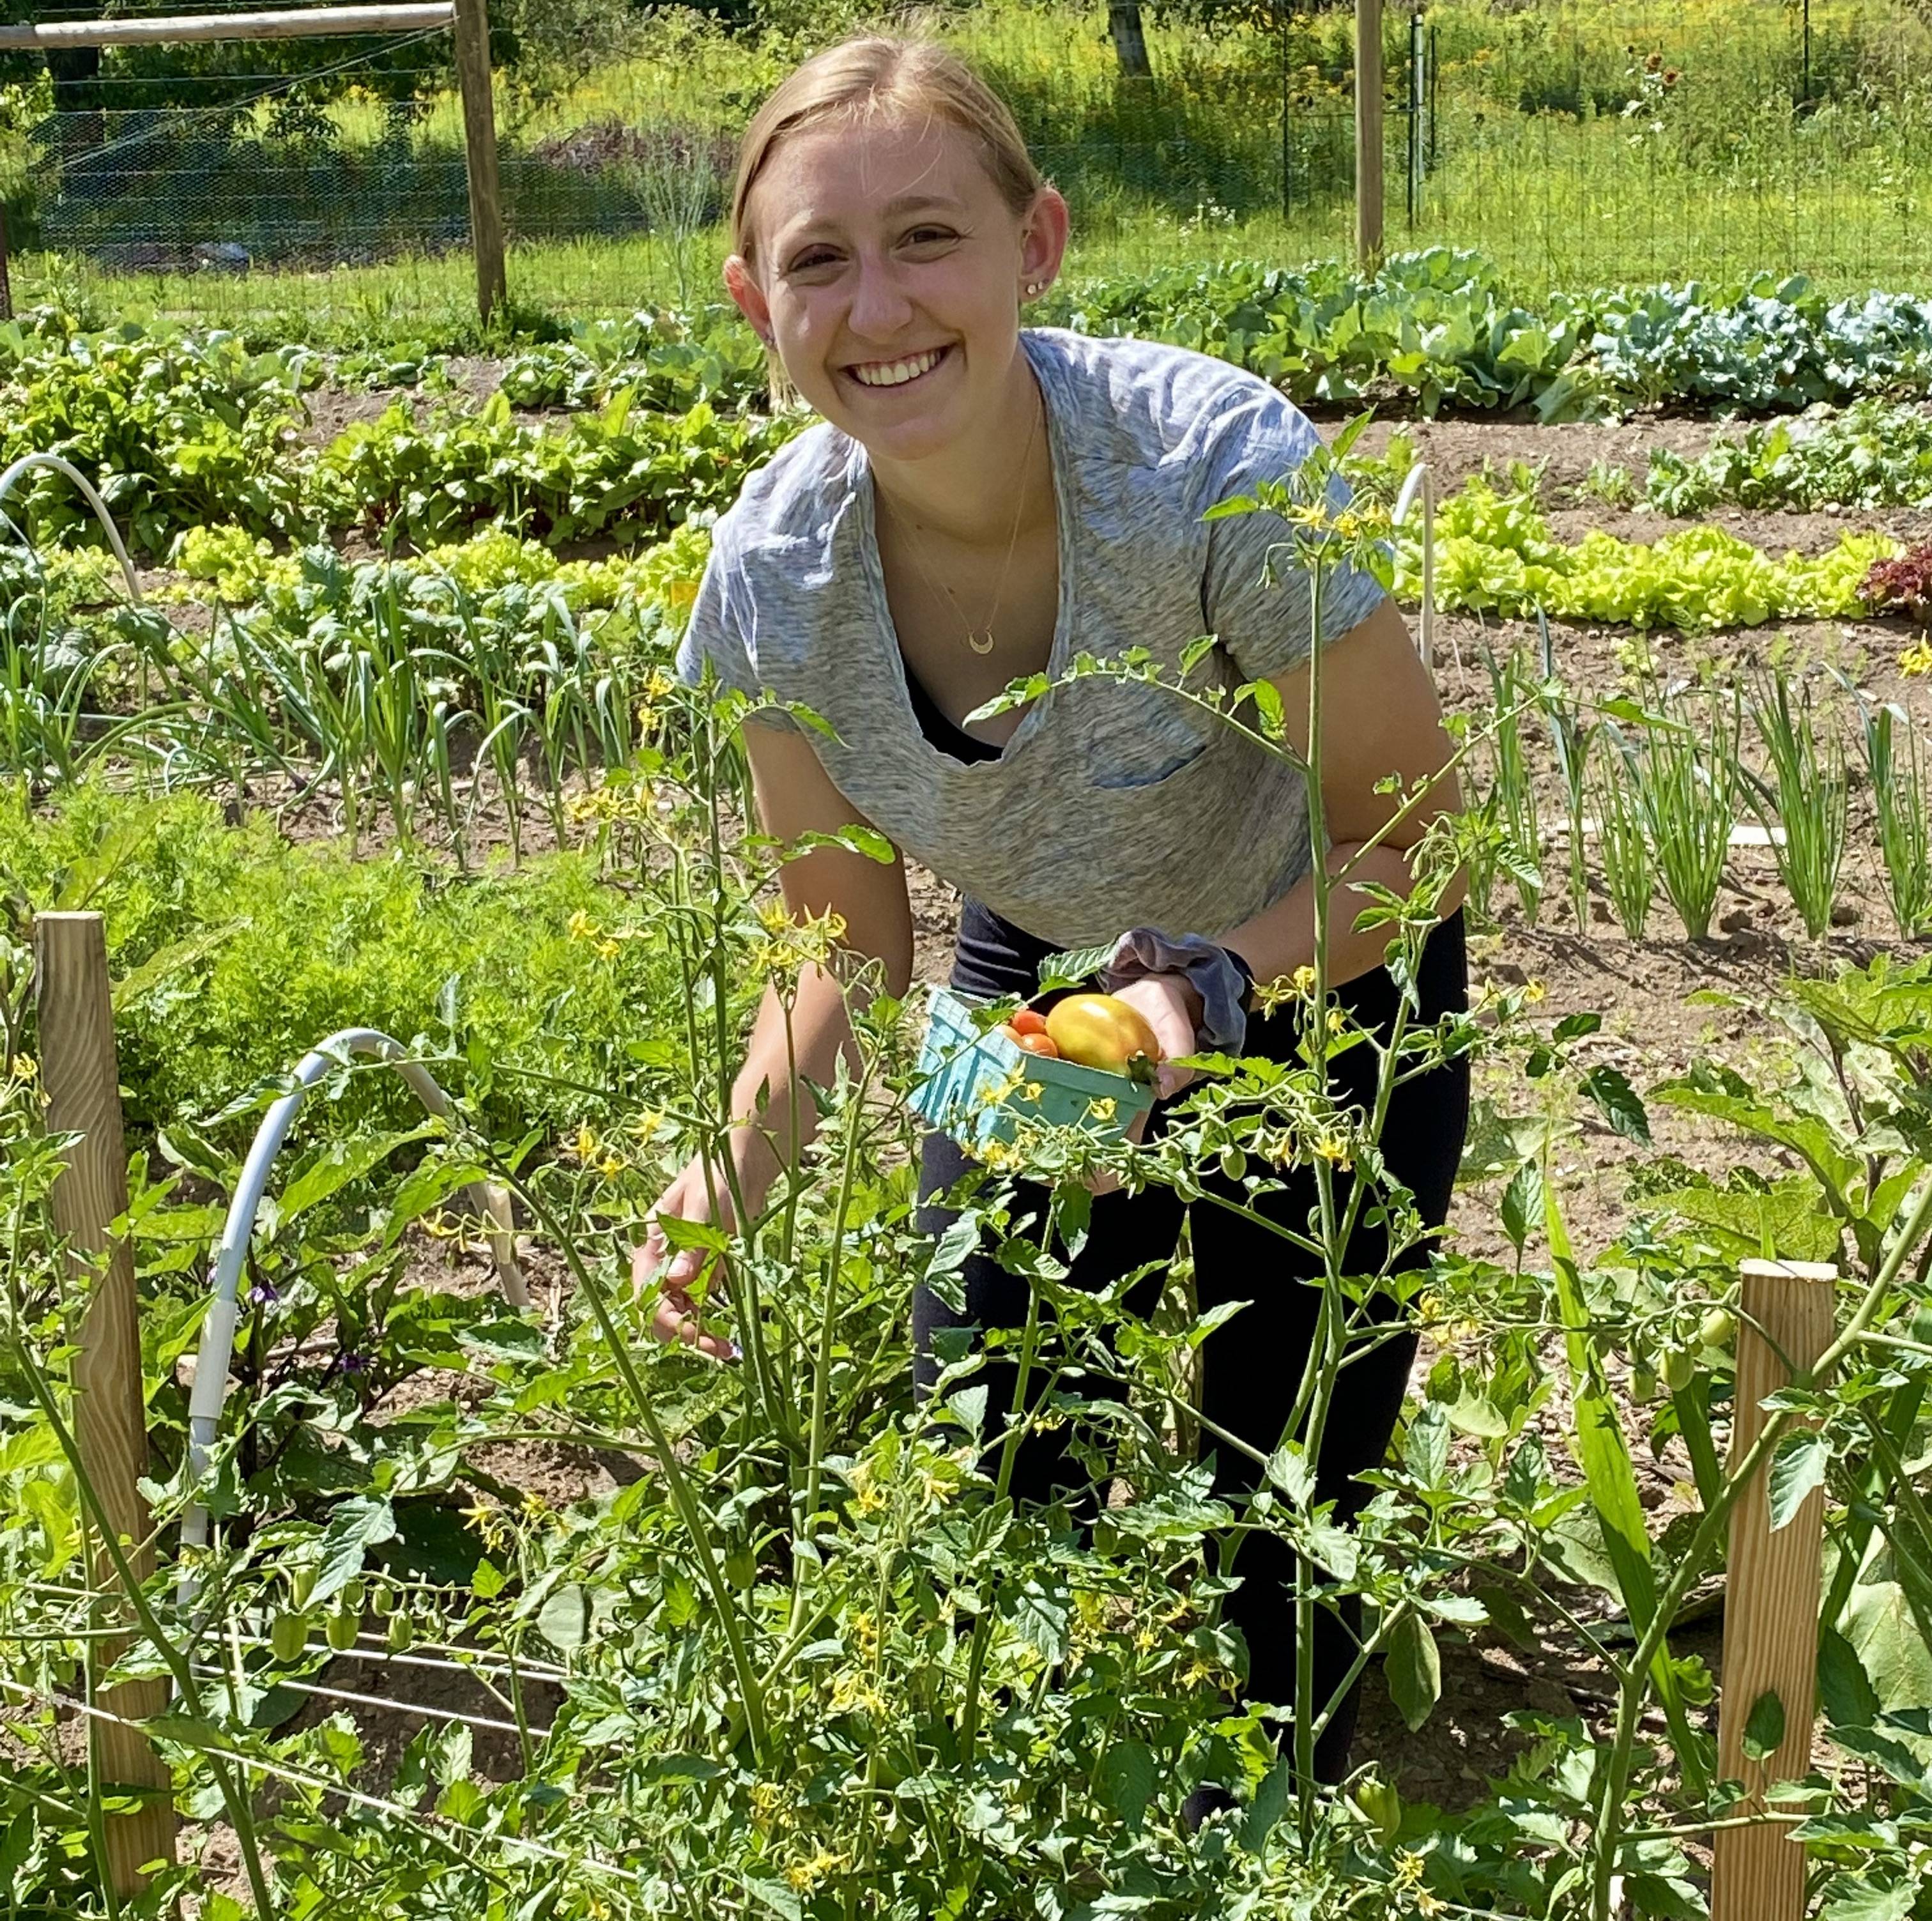 A student smiles at the camera while she places freshly-picked tomatoes in a container.